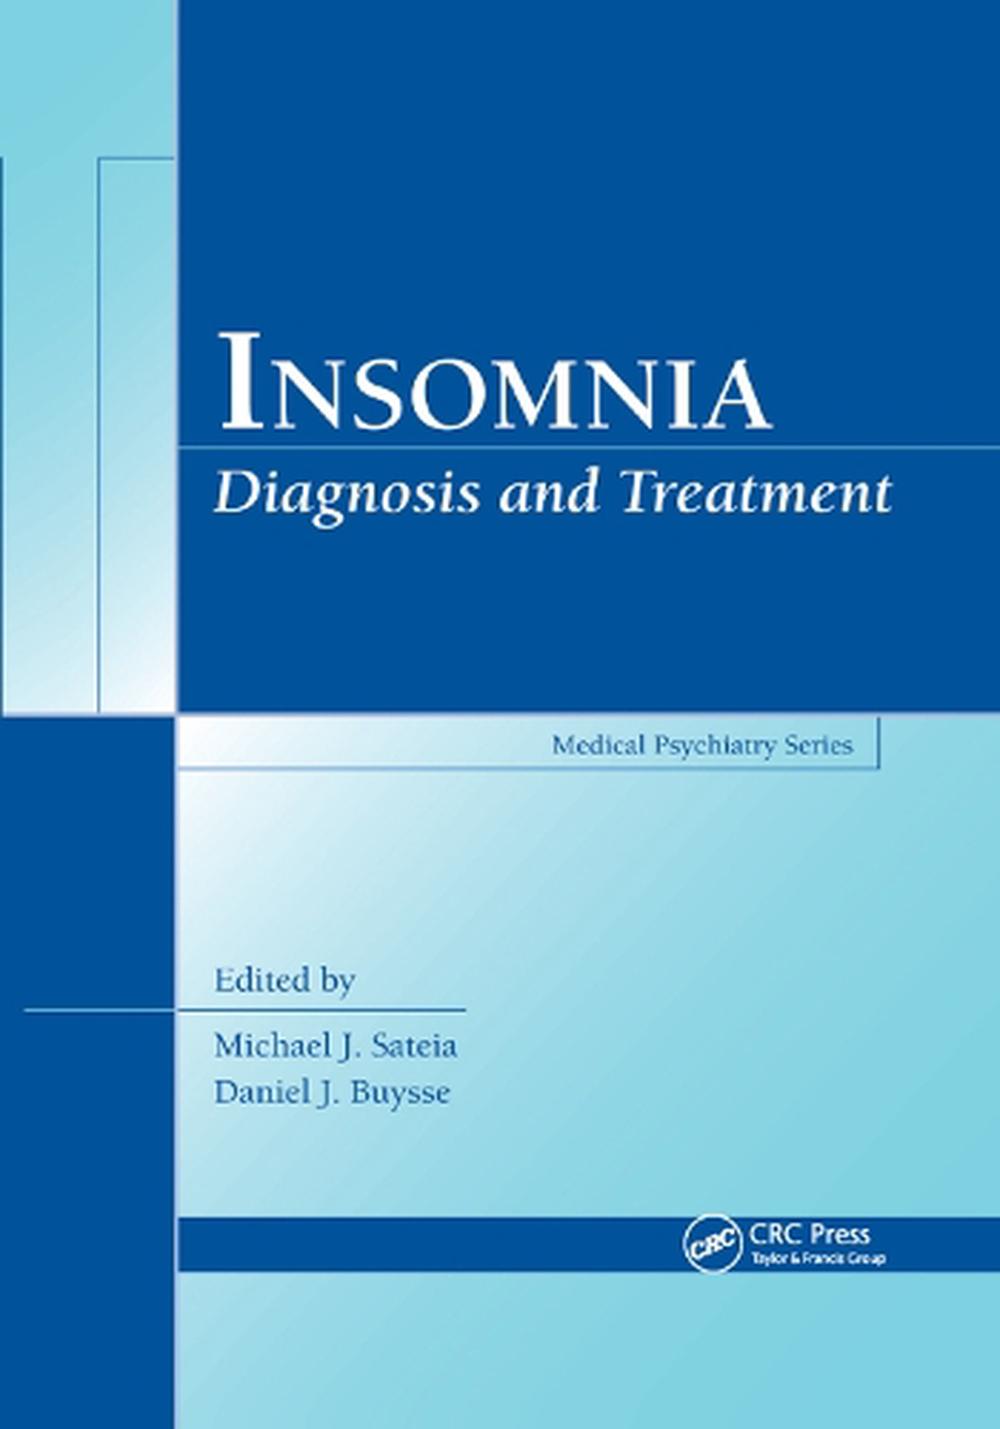 research articles insomnia